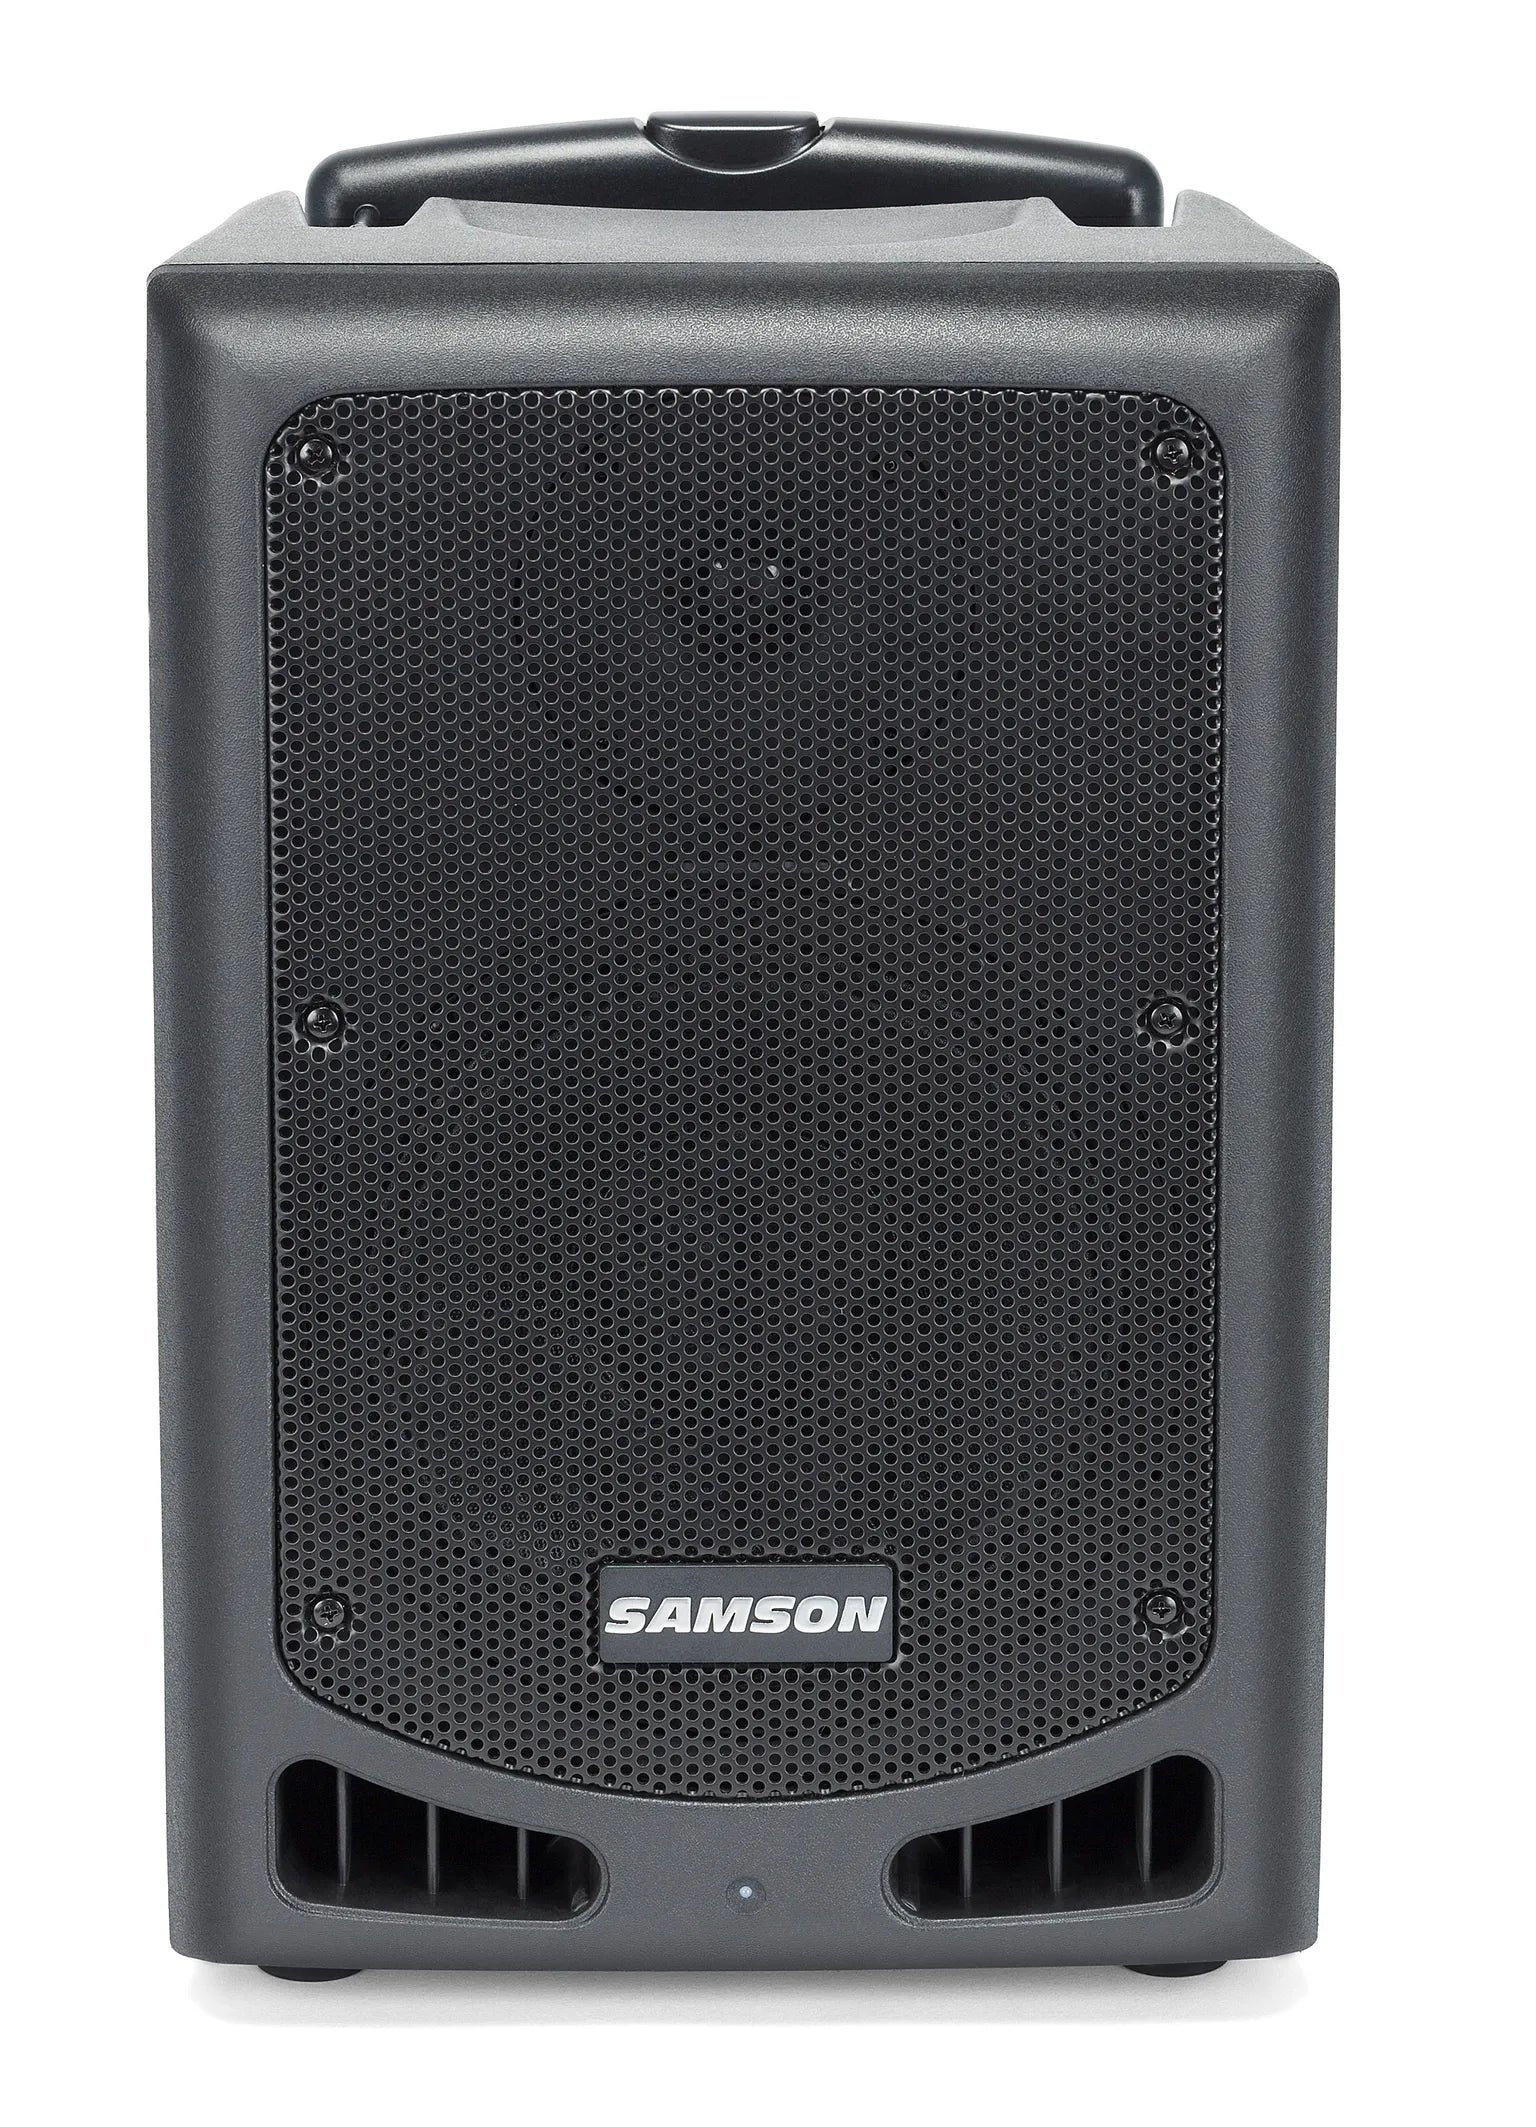 Samson Expedition Xp208w Portable Pa System